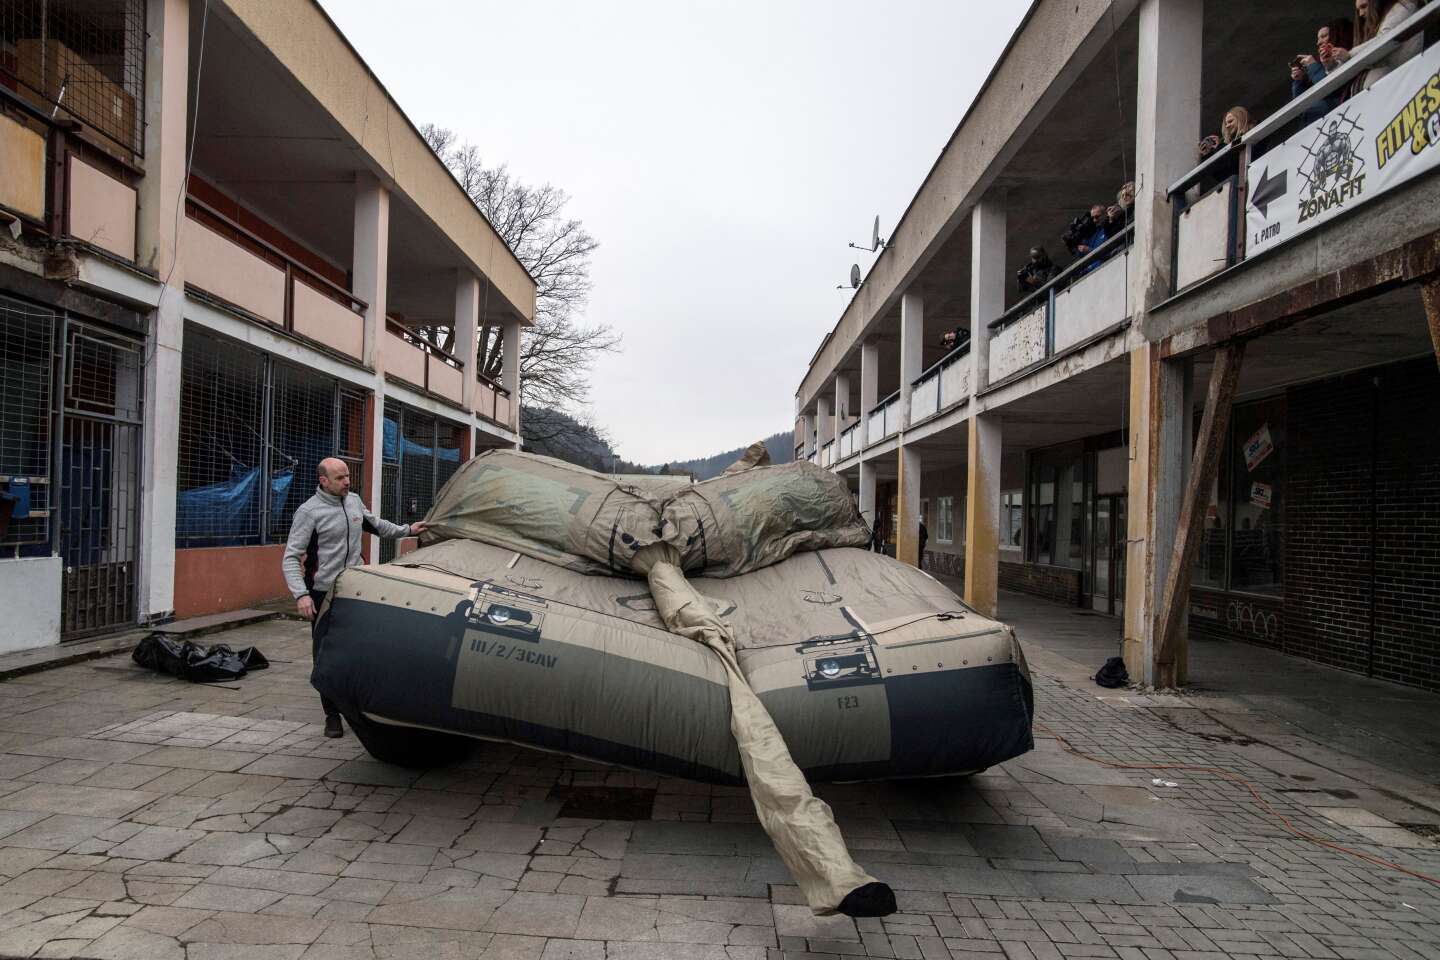 In the Czech Republic, a factory produces inflatable military devices to deceive the Russian military